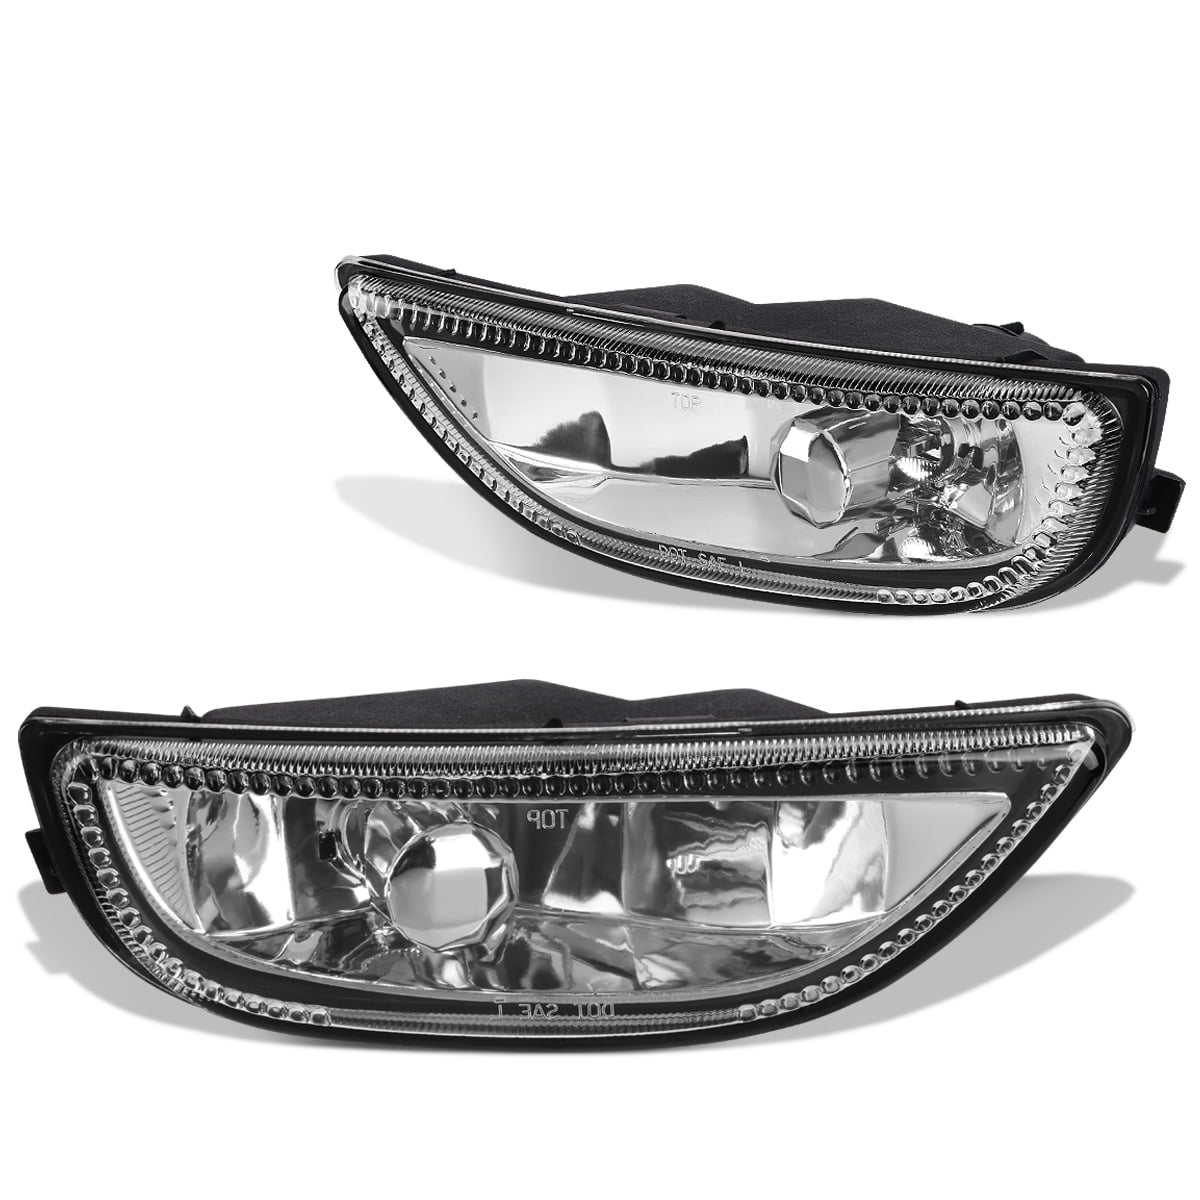 Smoked Replacement Bumper Driving Fog Lights Lamps For 2001-2002 Toyota Corolla 